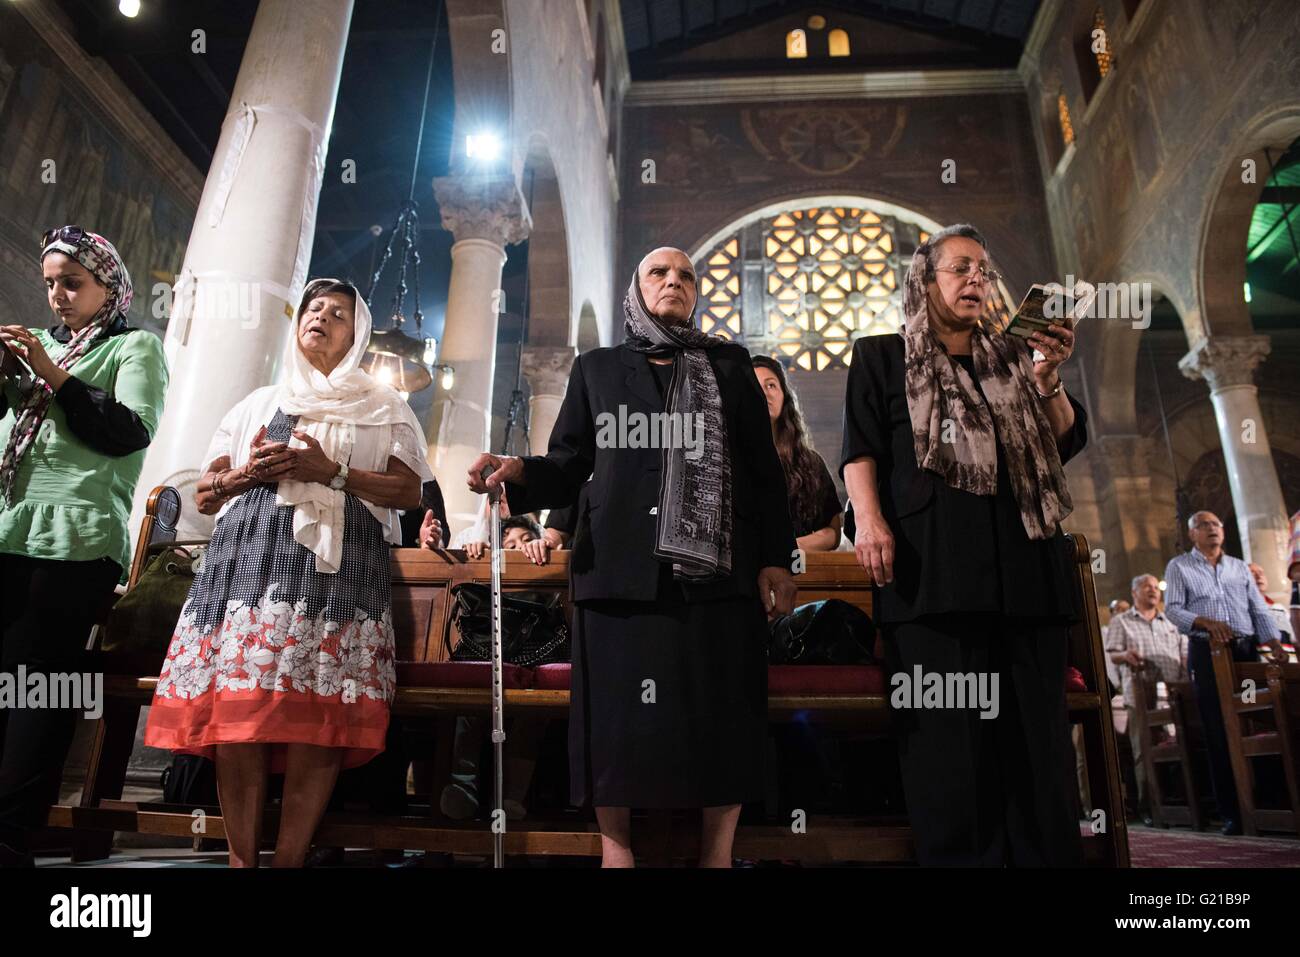 Cairo, Egypt. 22nd May, 2016. A mass is held for victims of crashed EgyptAir plane at Al-Boutrossiya Church, the main Coptic Cathedral complex, in Cairo, Egypt, May 22, 2016. Relatives and friends prayed for victims of crashed EgyptAir flight MS804 plane at the church Sunday. Egyptian President Abdel-Fattah al-Sisi said on Sunday that no assumption is certain why the Egyptair plane crashed over Mediterranean the last week. Credit:  Meng Tao/Xinhua/Alamy Live News Stock Photo